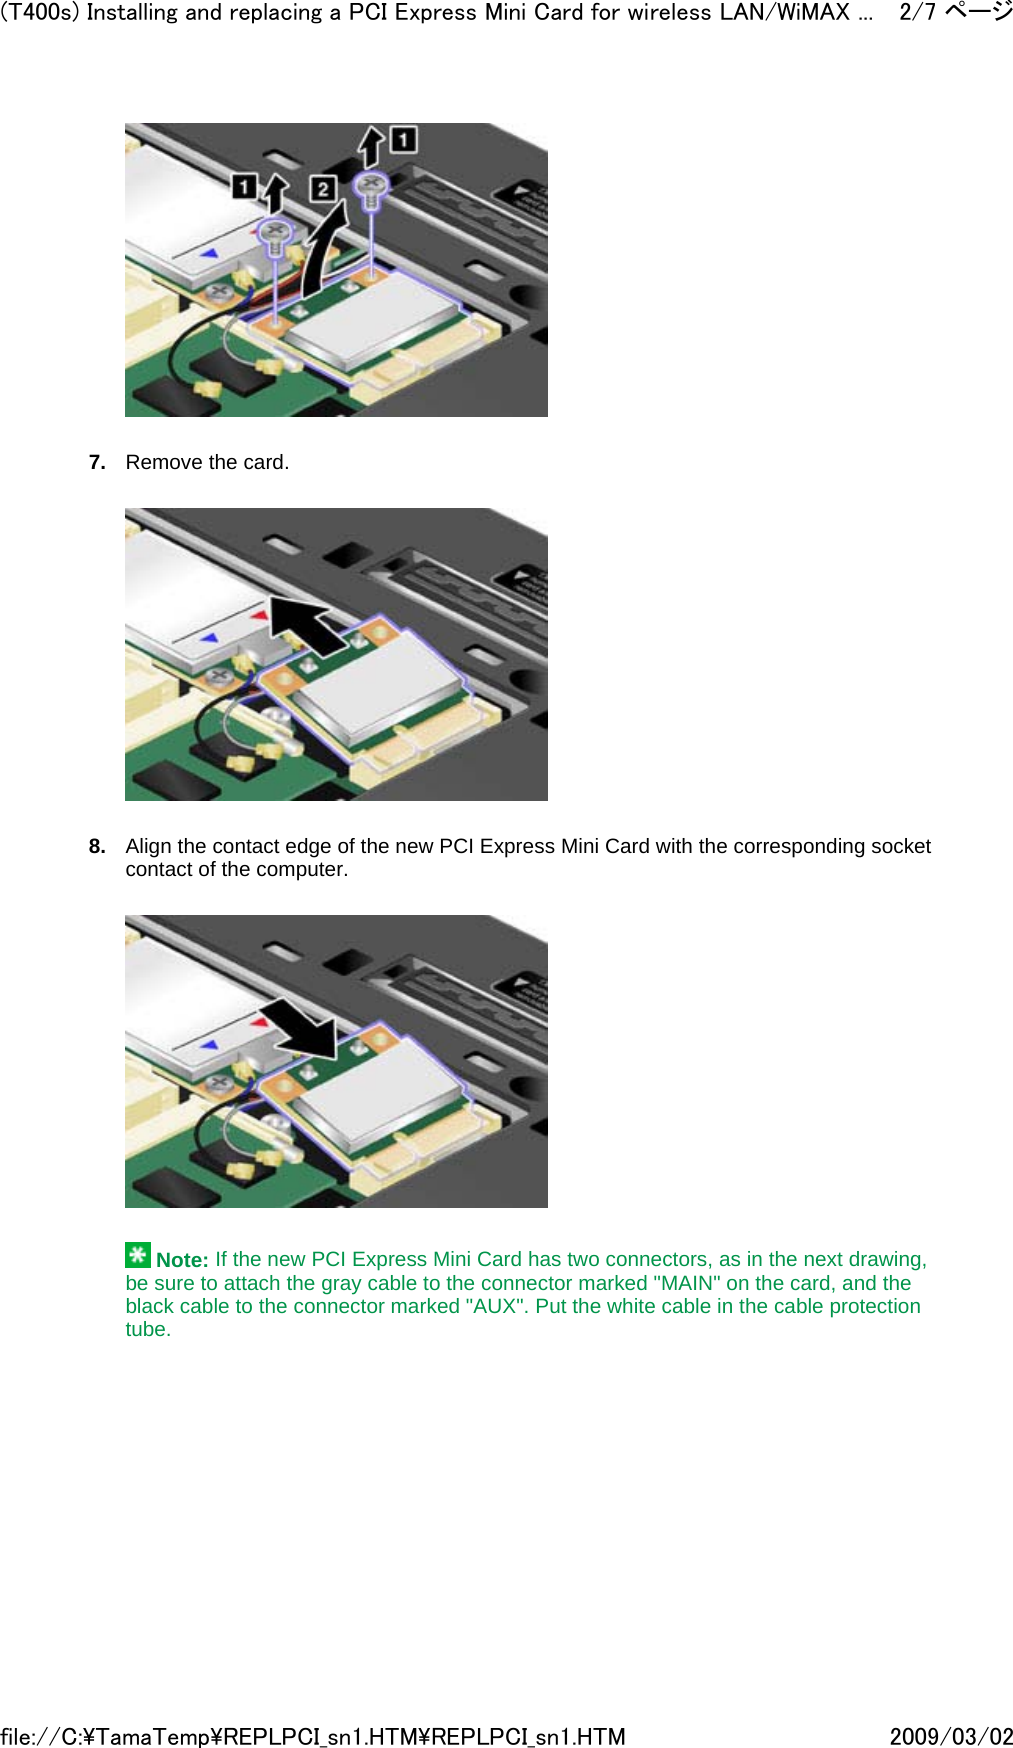    7. Remove the card.       8. Align the contact edge of the new PCI Express Mini Card with the corresponding socket contact of the computer.        Note: If the new PCI Express Mini Card has two connectors, as in the next drawing, be sure to attach the gray cable to the connector marked &quot;MAIN&quot; on the card, and the black cable to the connector marked &quot;AUX&quot;. Put the white cable in the cable protection tube.   2/7 ページ(T400s) Installing and replacing a PCI Express Mini Card for wireless LAN/WiMAX ...2009/03/02file://C:\TamaTemp\REPLPCI_sn1.HTM\REPLPCI_sn1.HTM